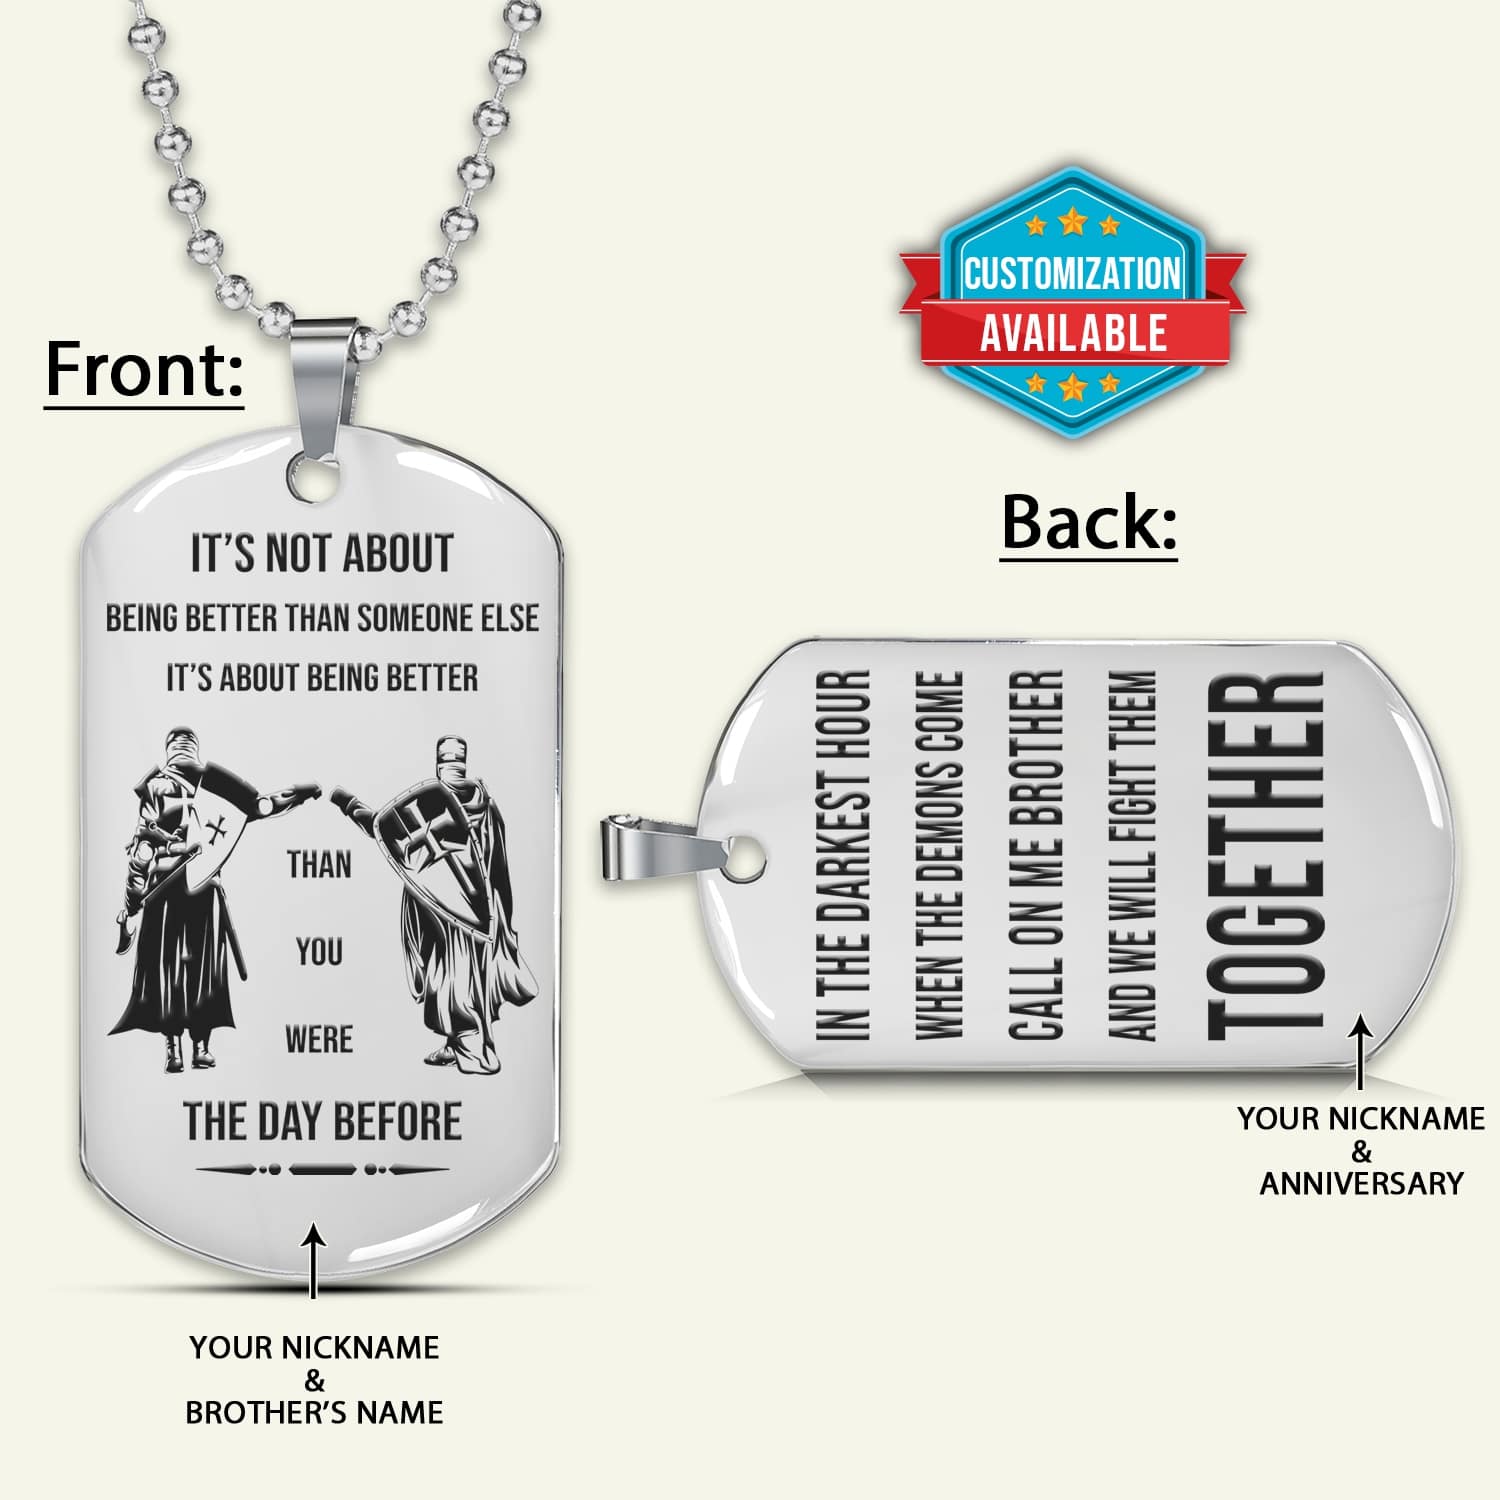 KTD030 - Call On Me Brother - It's About Being Better Than You Were The Day Before - Knights Templar - Silver Double-Sided Dog Tag